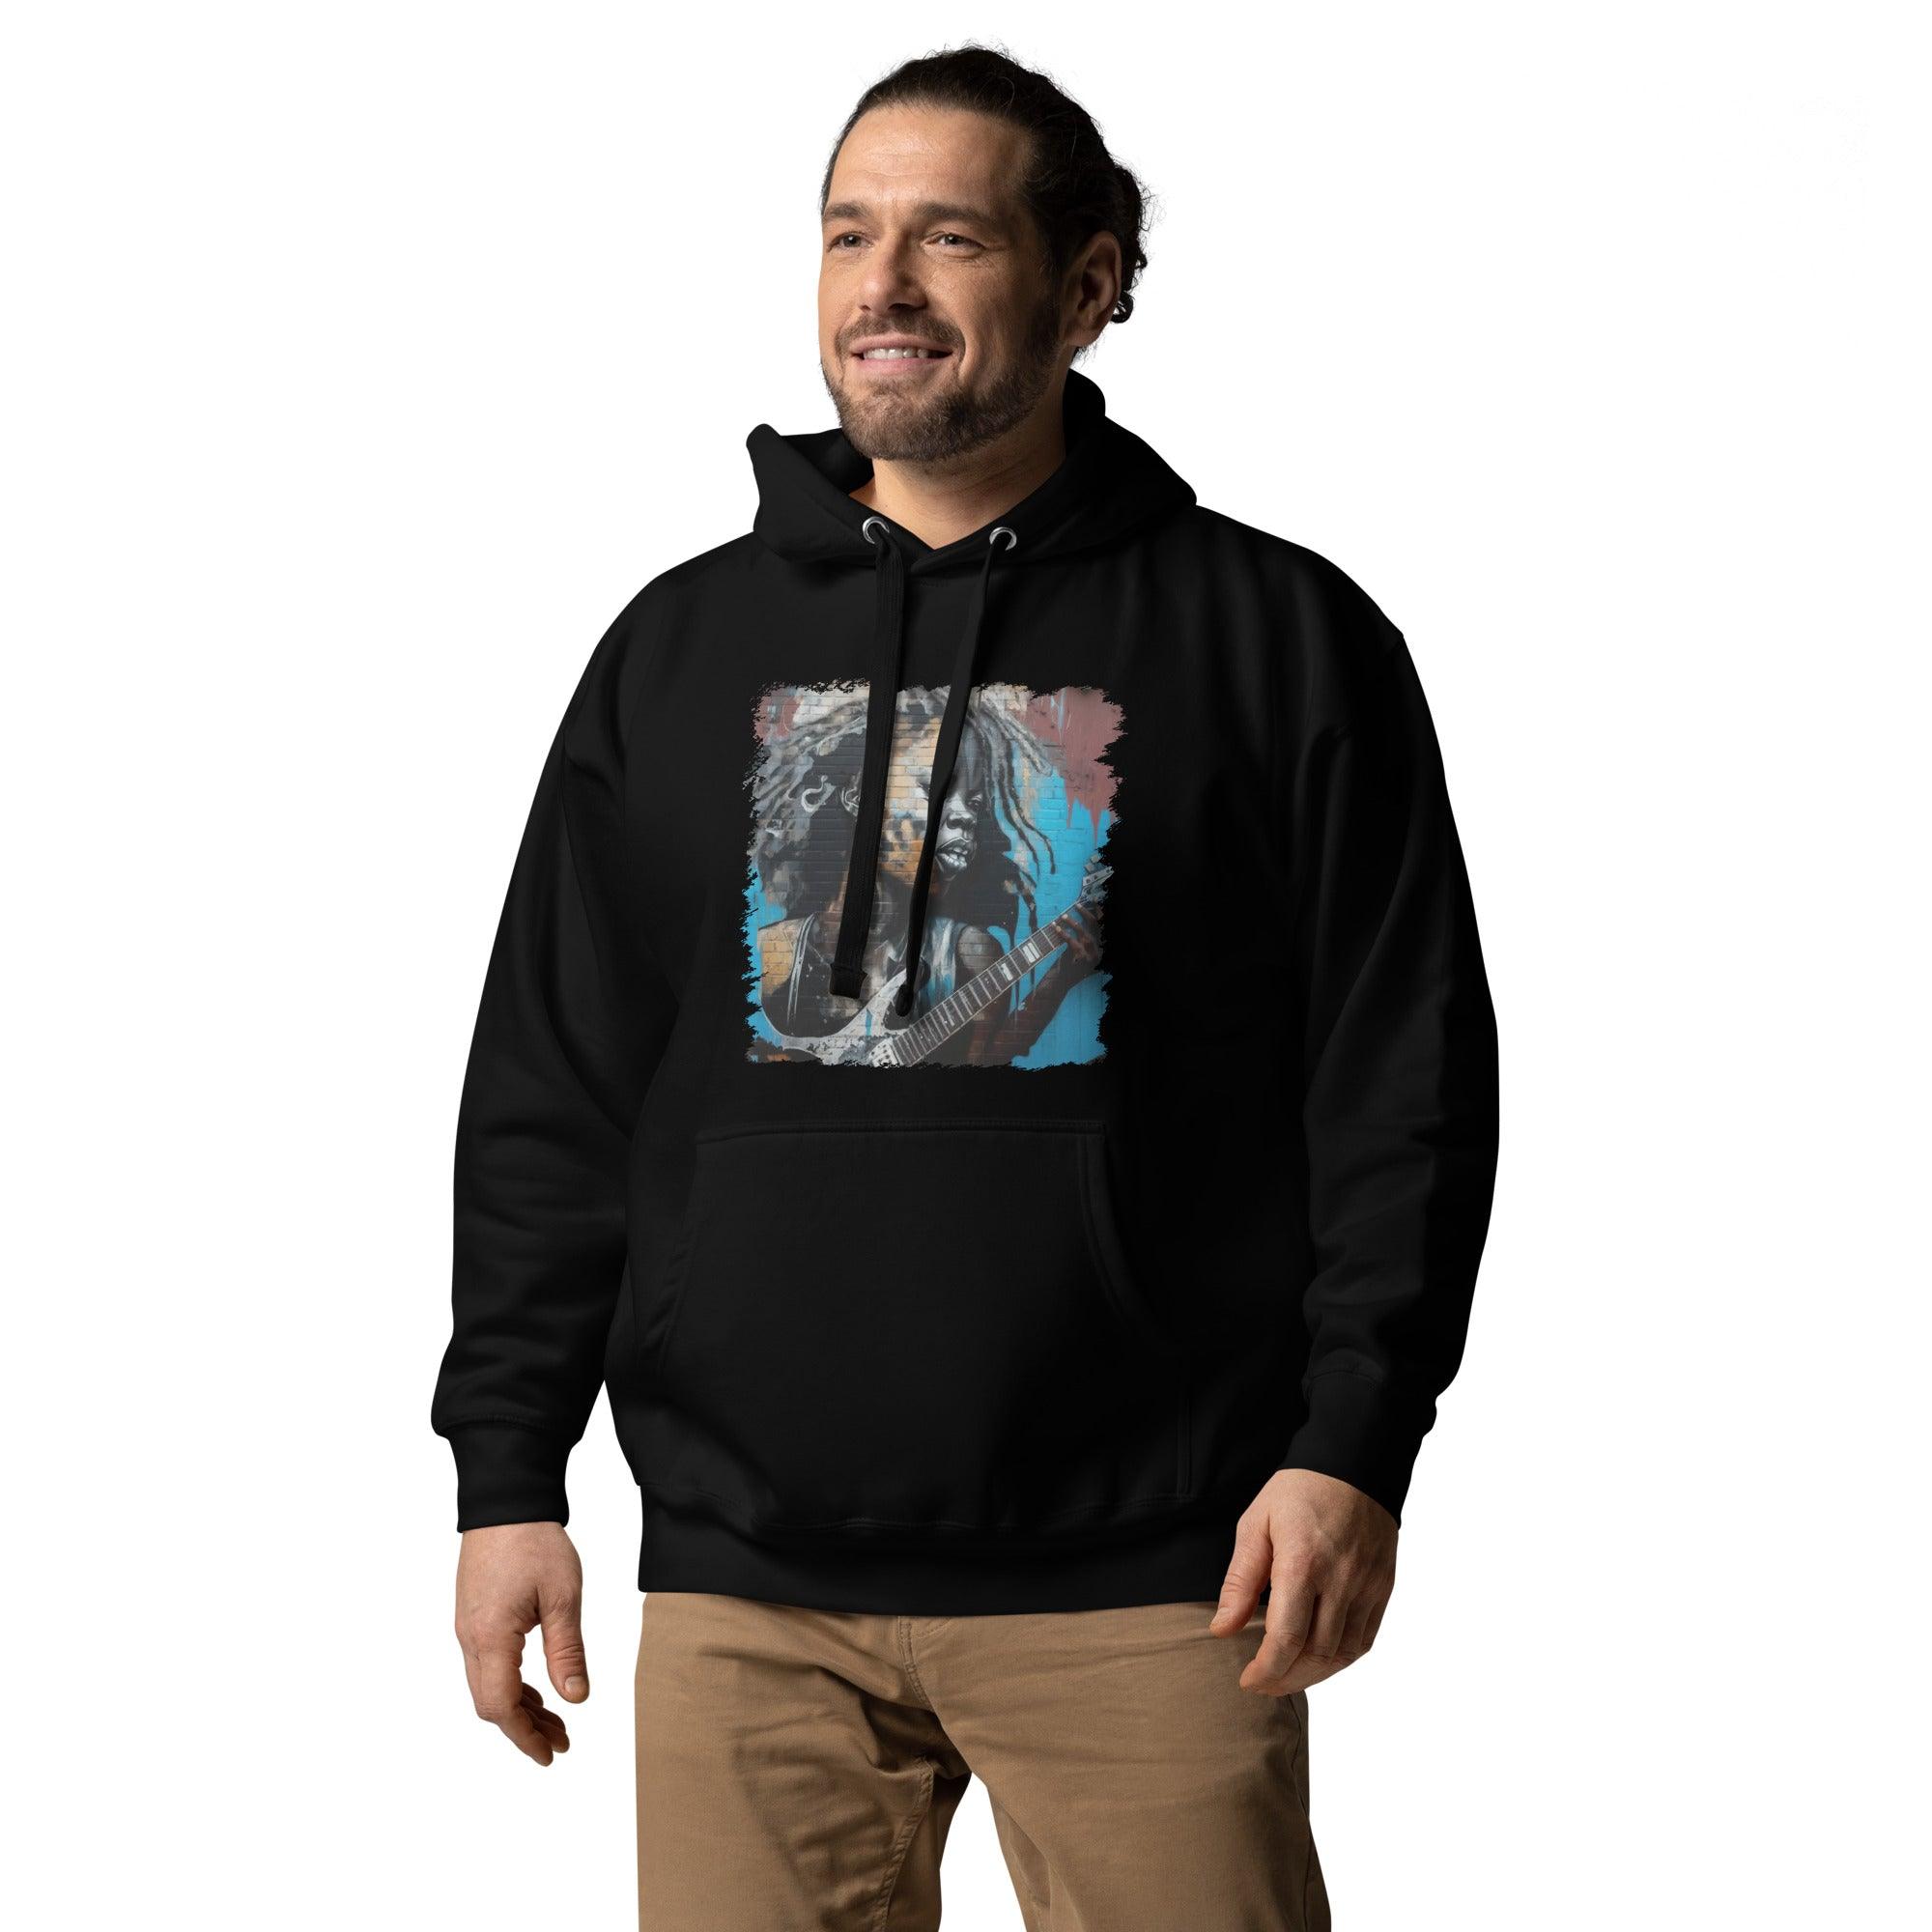 Guitar In Hand, Heart On Fire Unisex Hoodie - Beyond T-shirts